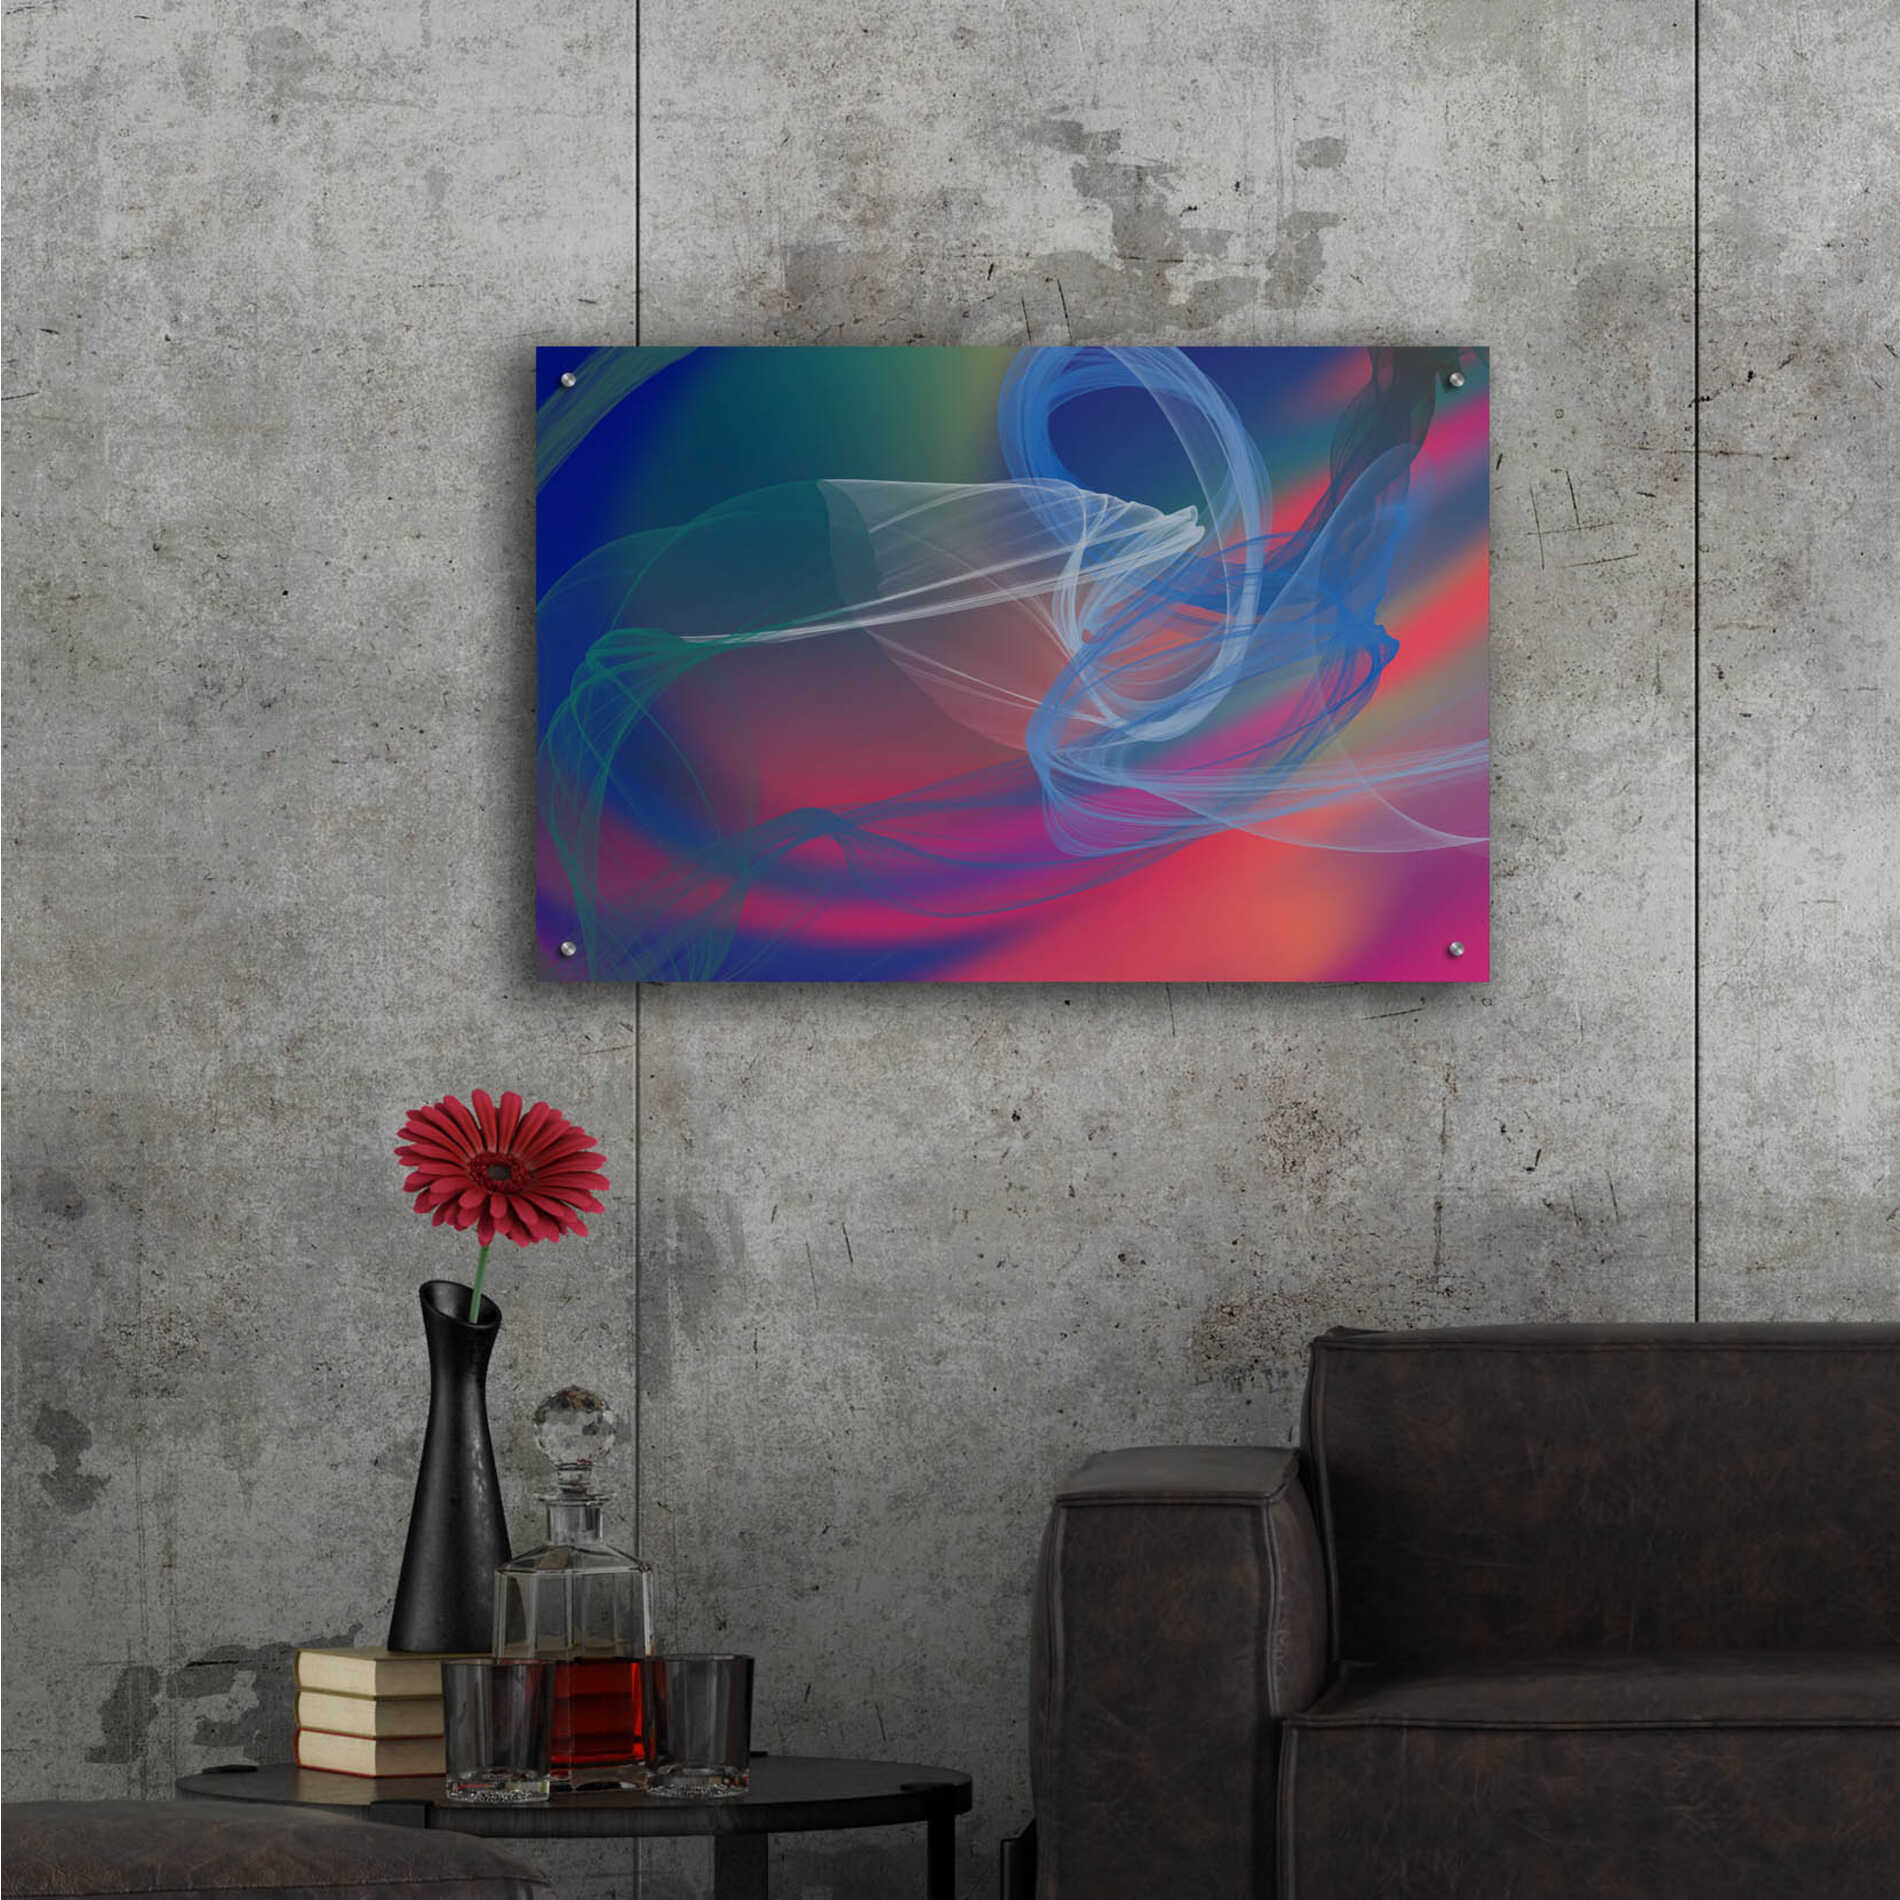 Epic Art 'Inverted Color In The Lines 4' by Irena Orlov Acrylic Glass Wall Art,36x24